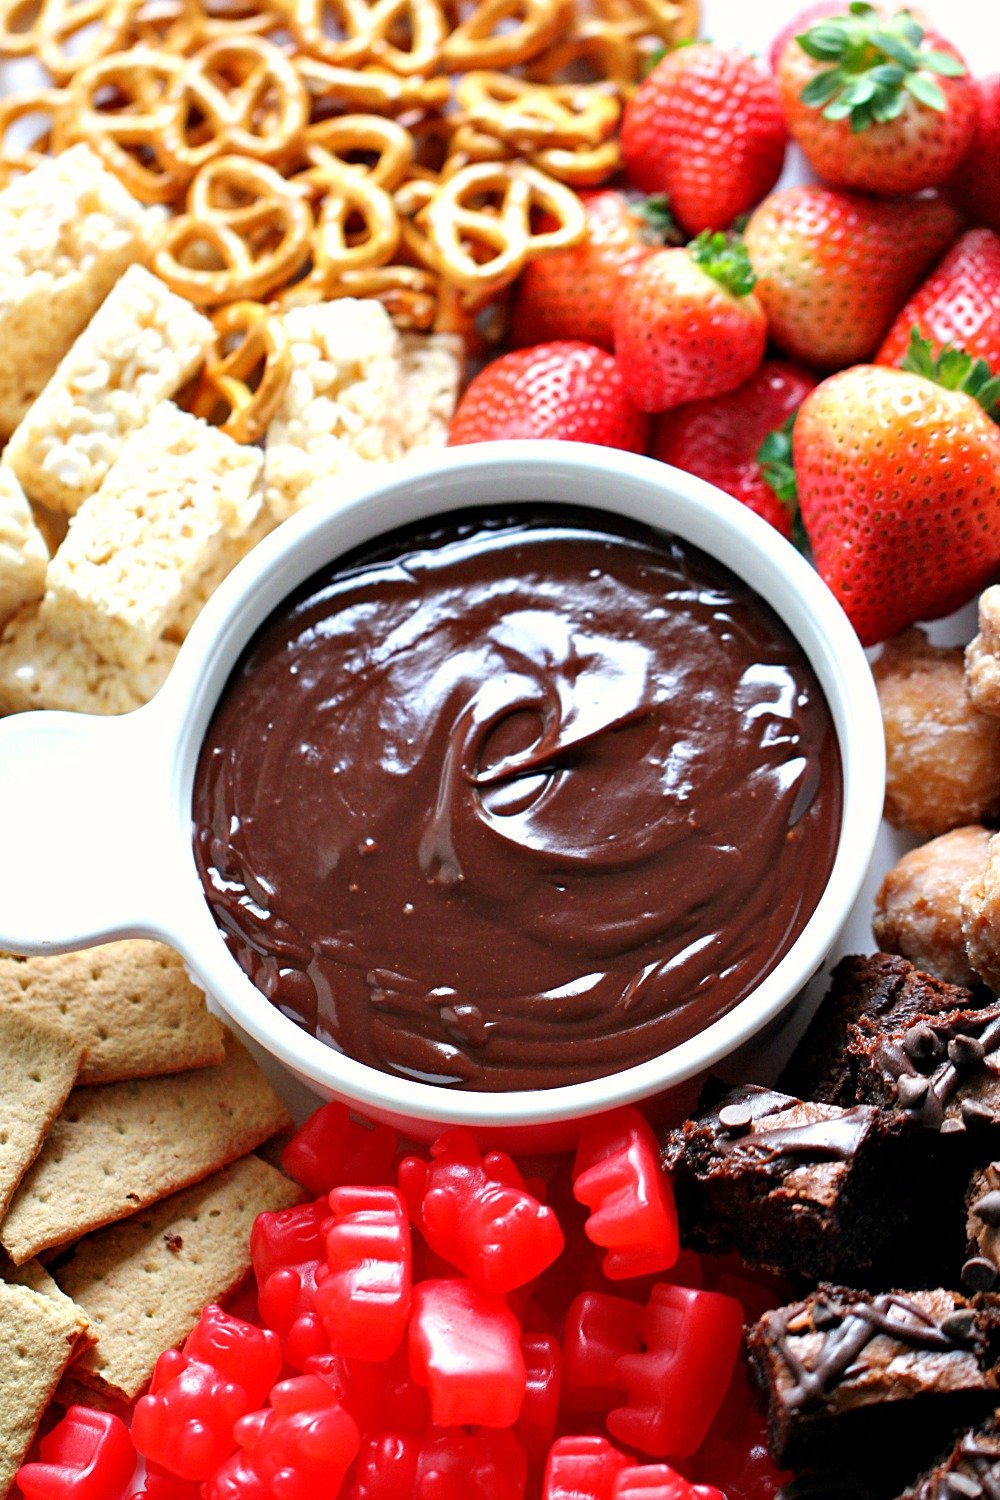 Instant Pot Chocolate Fondue Recipe (Melted Chocolate for Dipping)